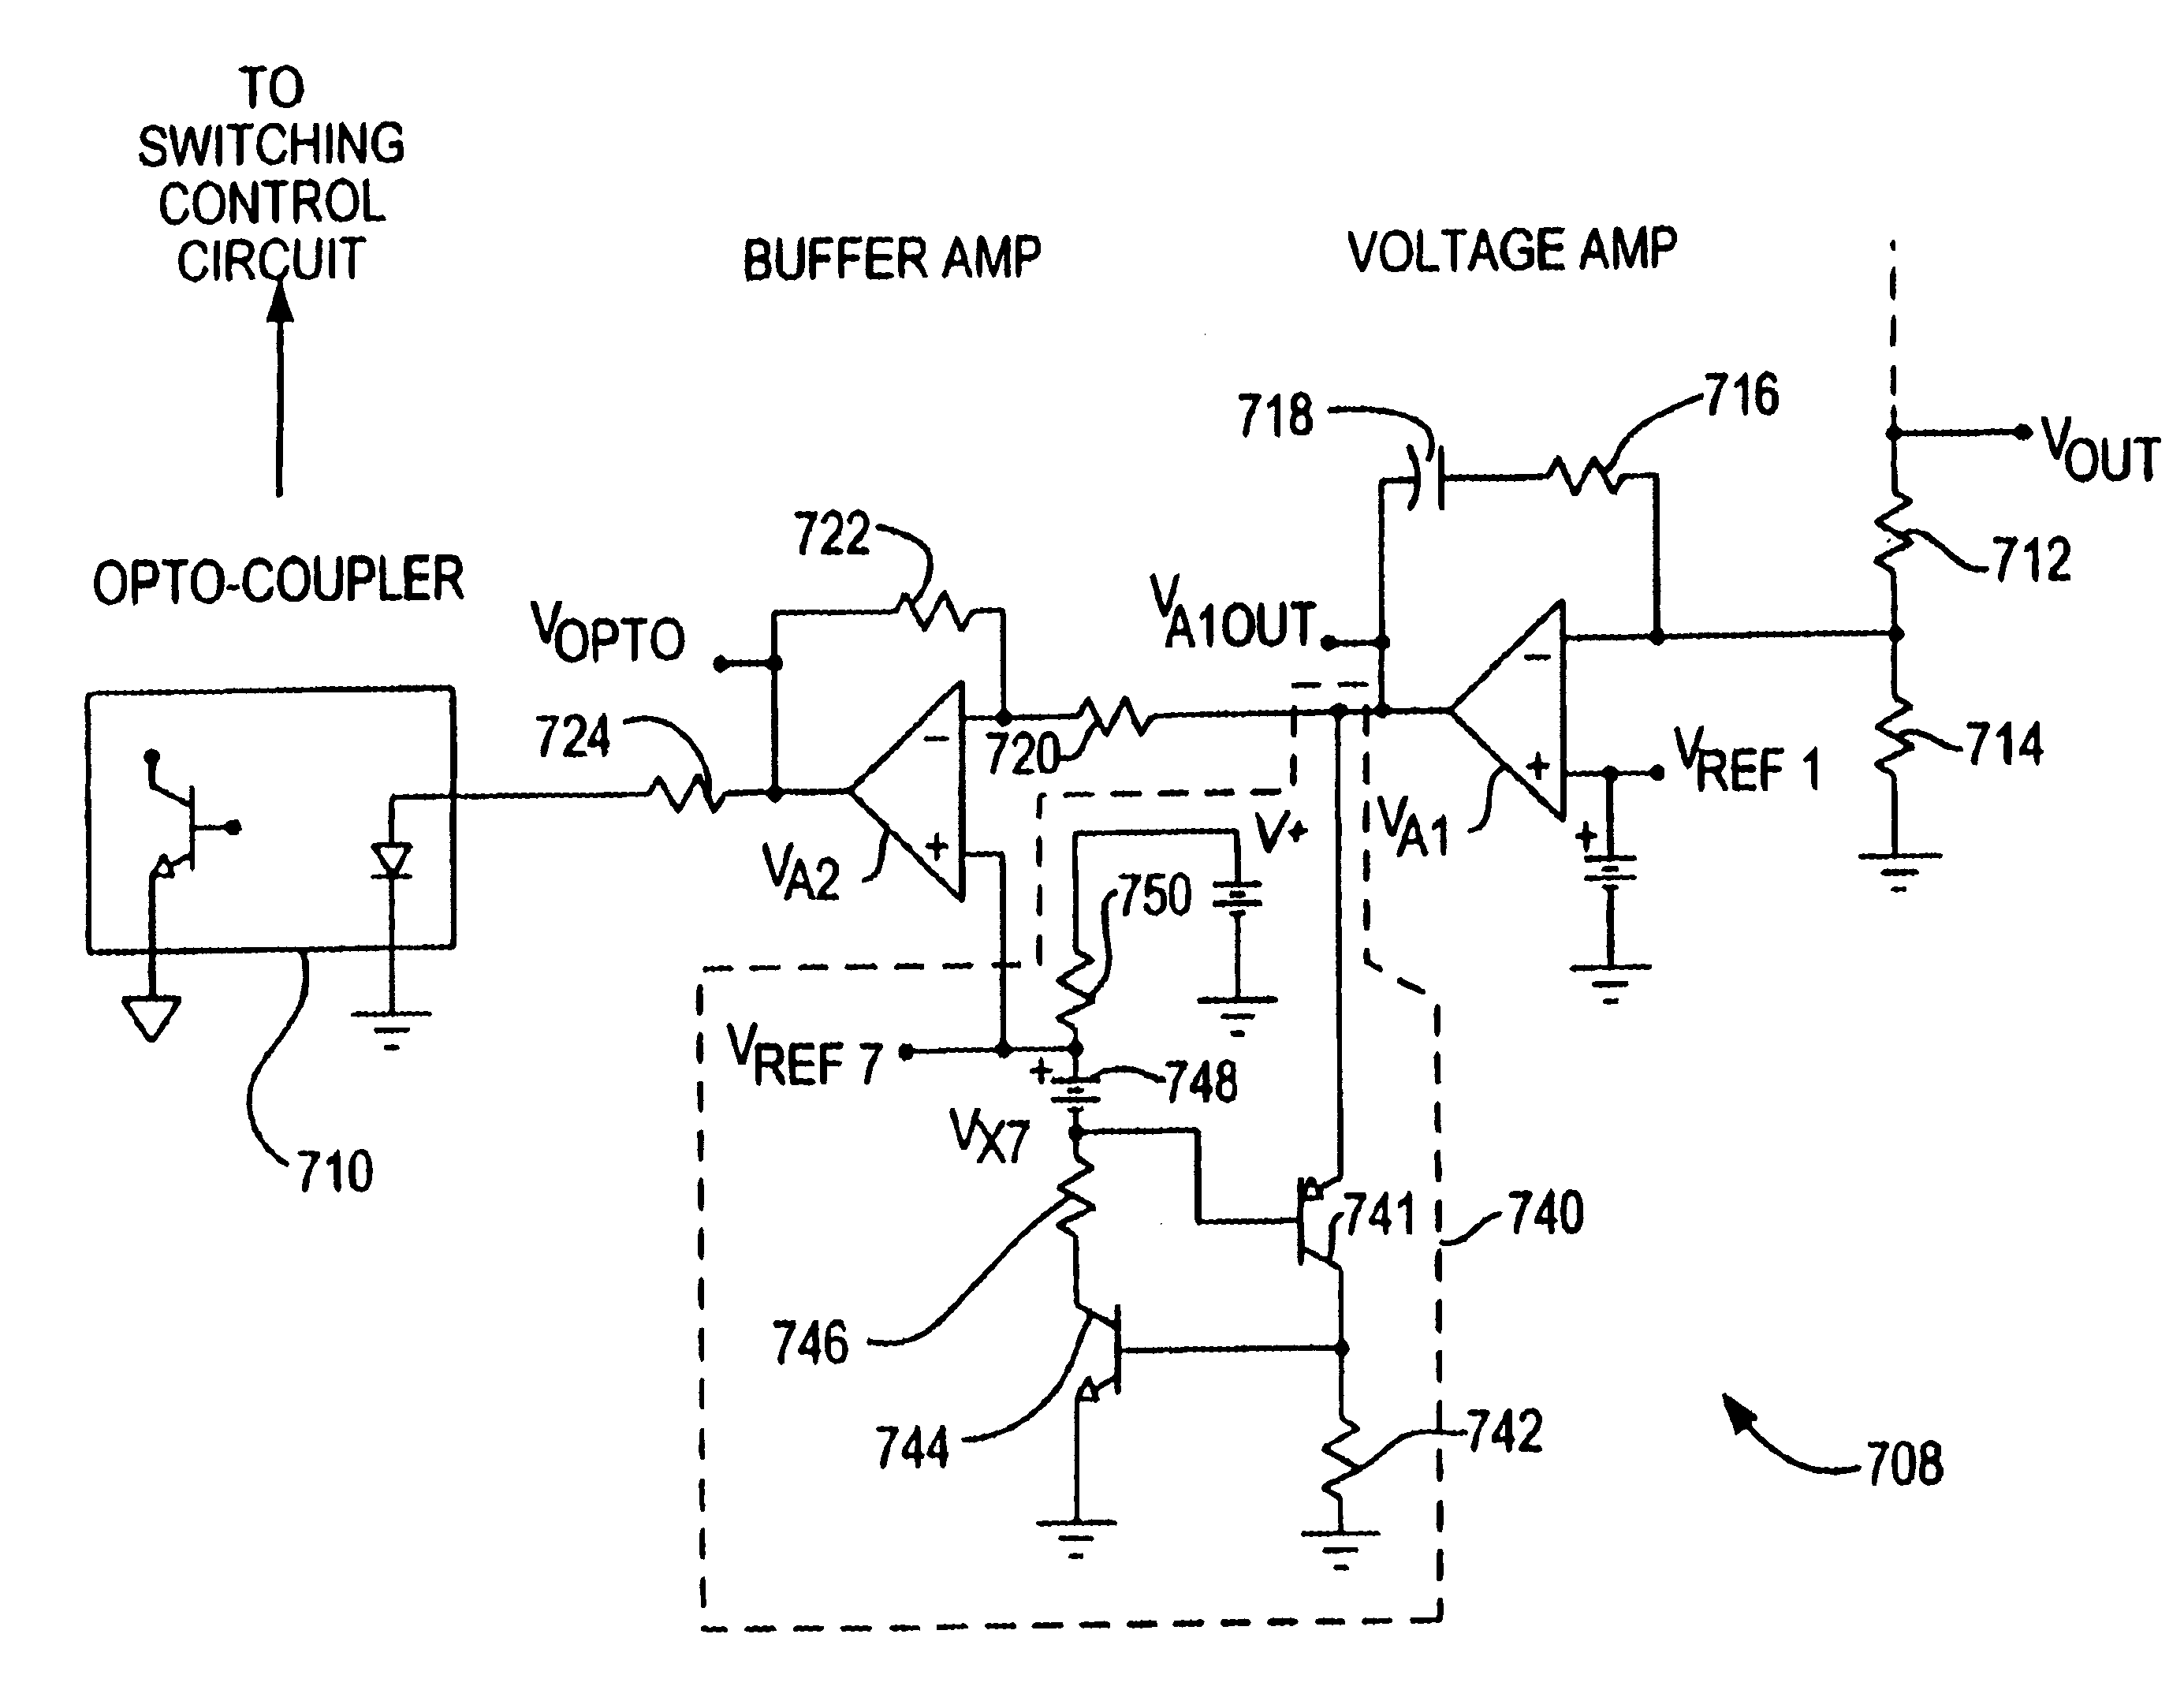 Voltage overshoot reduction circuits